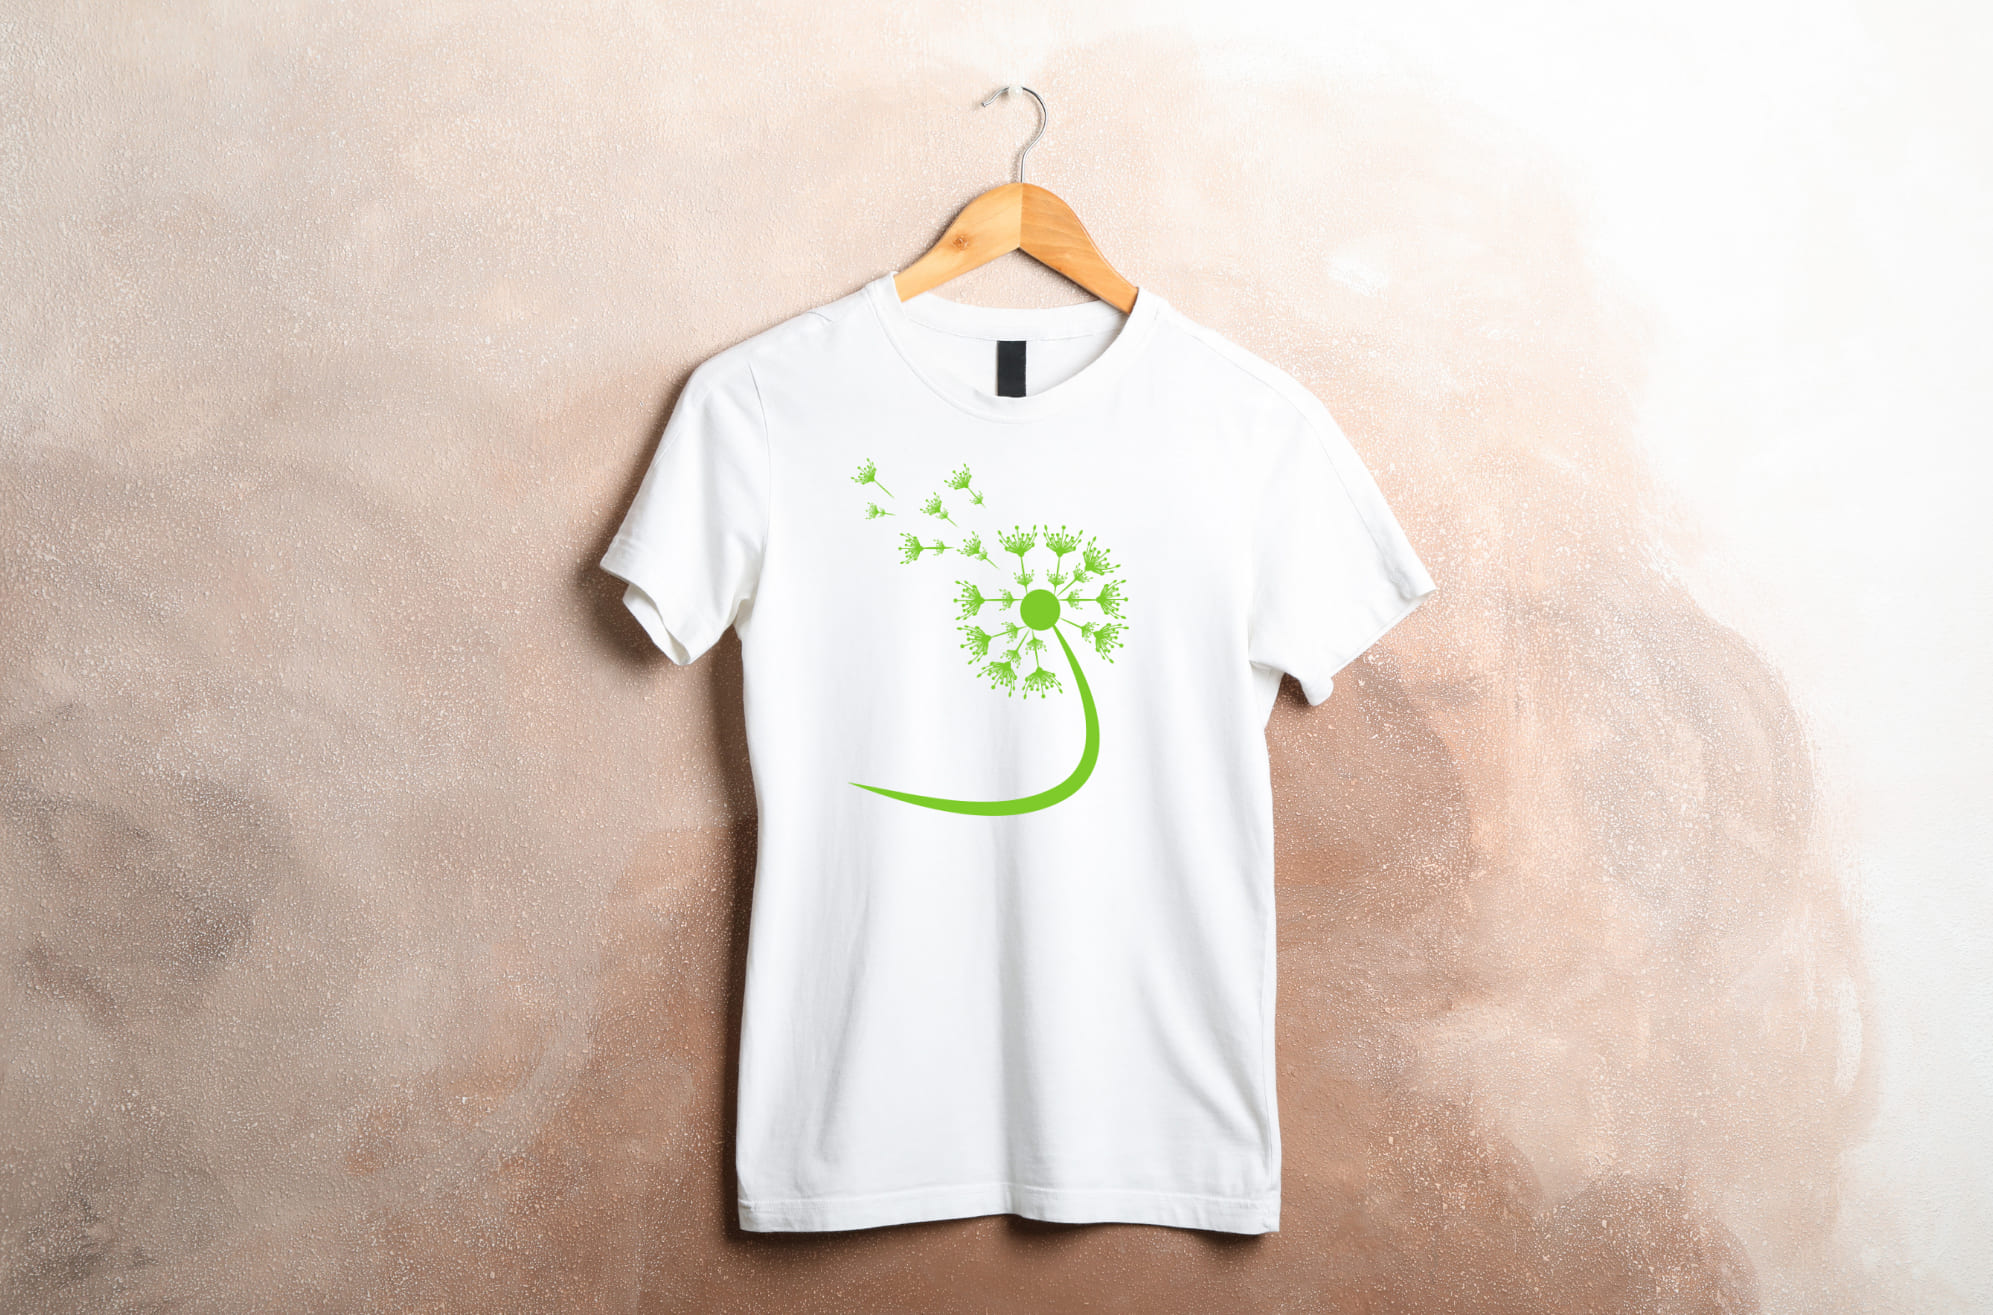 T-shirt image with adorable dandelion print in green.